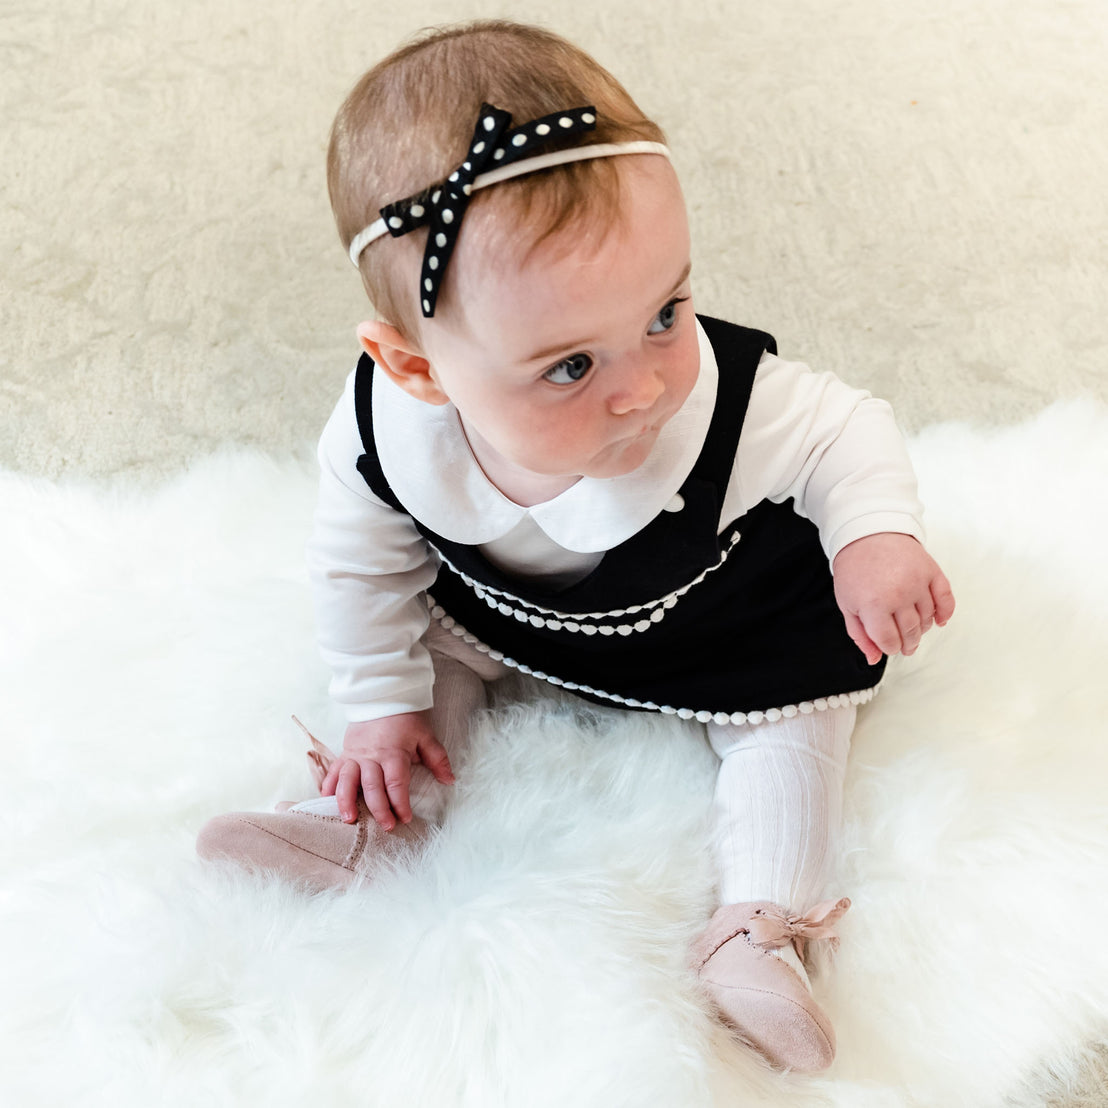 A baby girl sitting on a white fuzzy blanket, wearing a stylish black and white dress with a June Bow Headband and pink shoes, looking to her right with a curious expression.